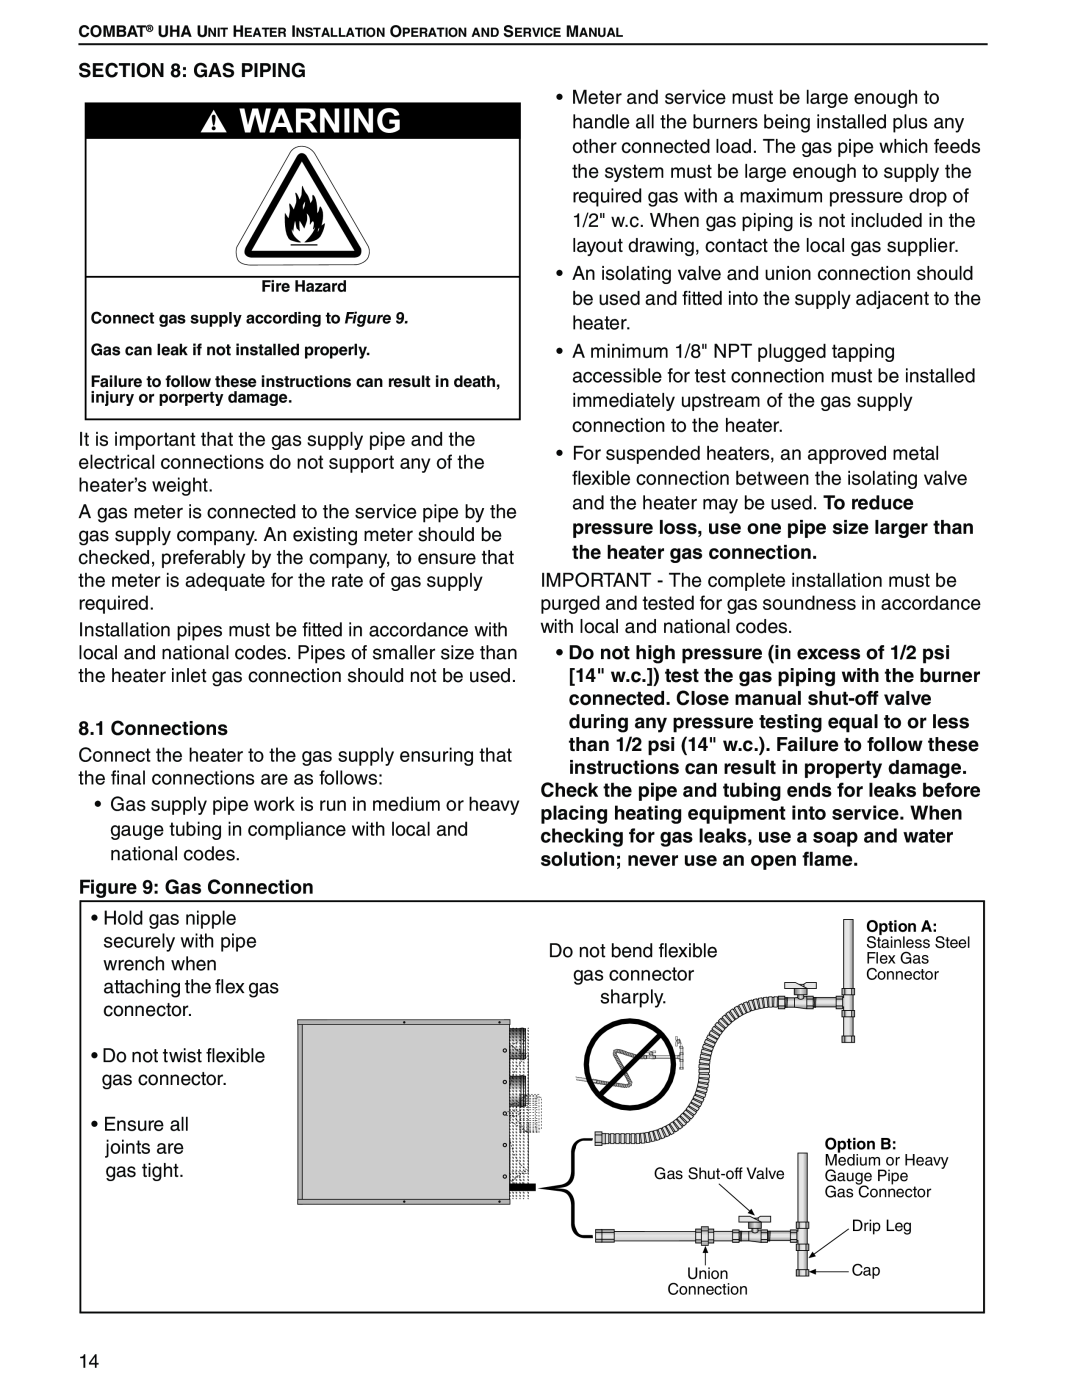 Roberts Gorden 225 250, 200, 350, 150, 400, 300, 175 service manual Gas Piping, Connections, Gas Connection 